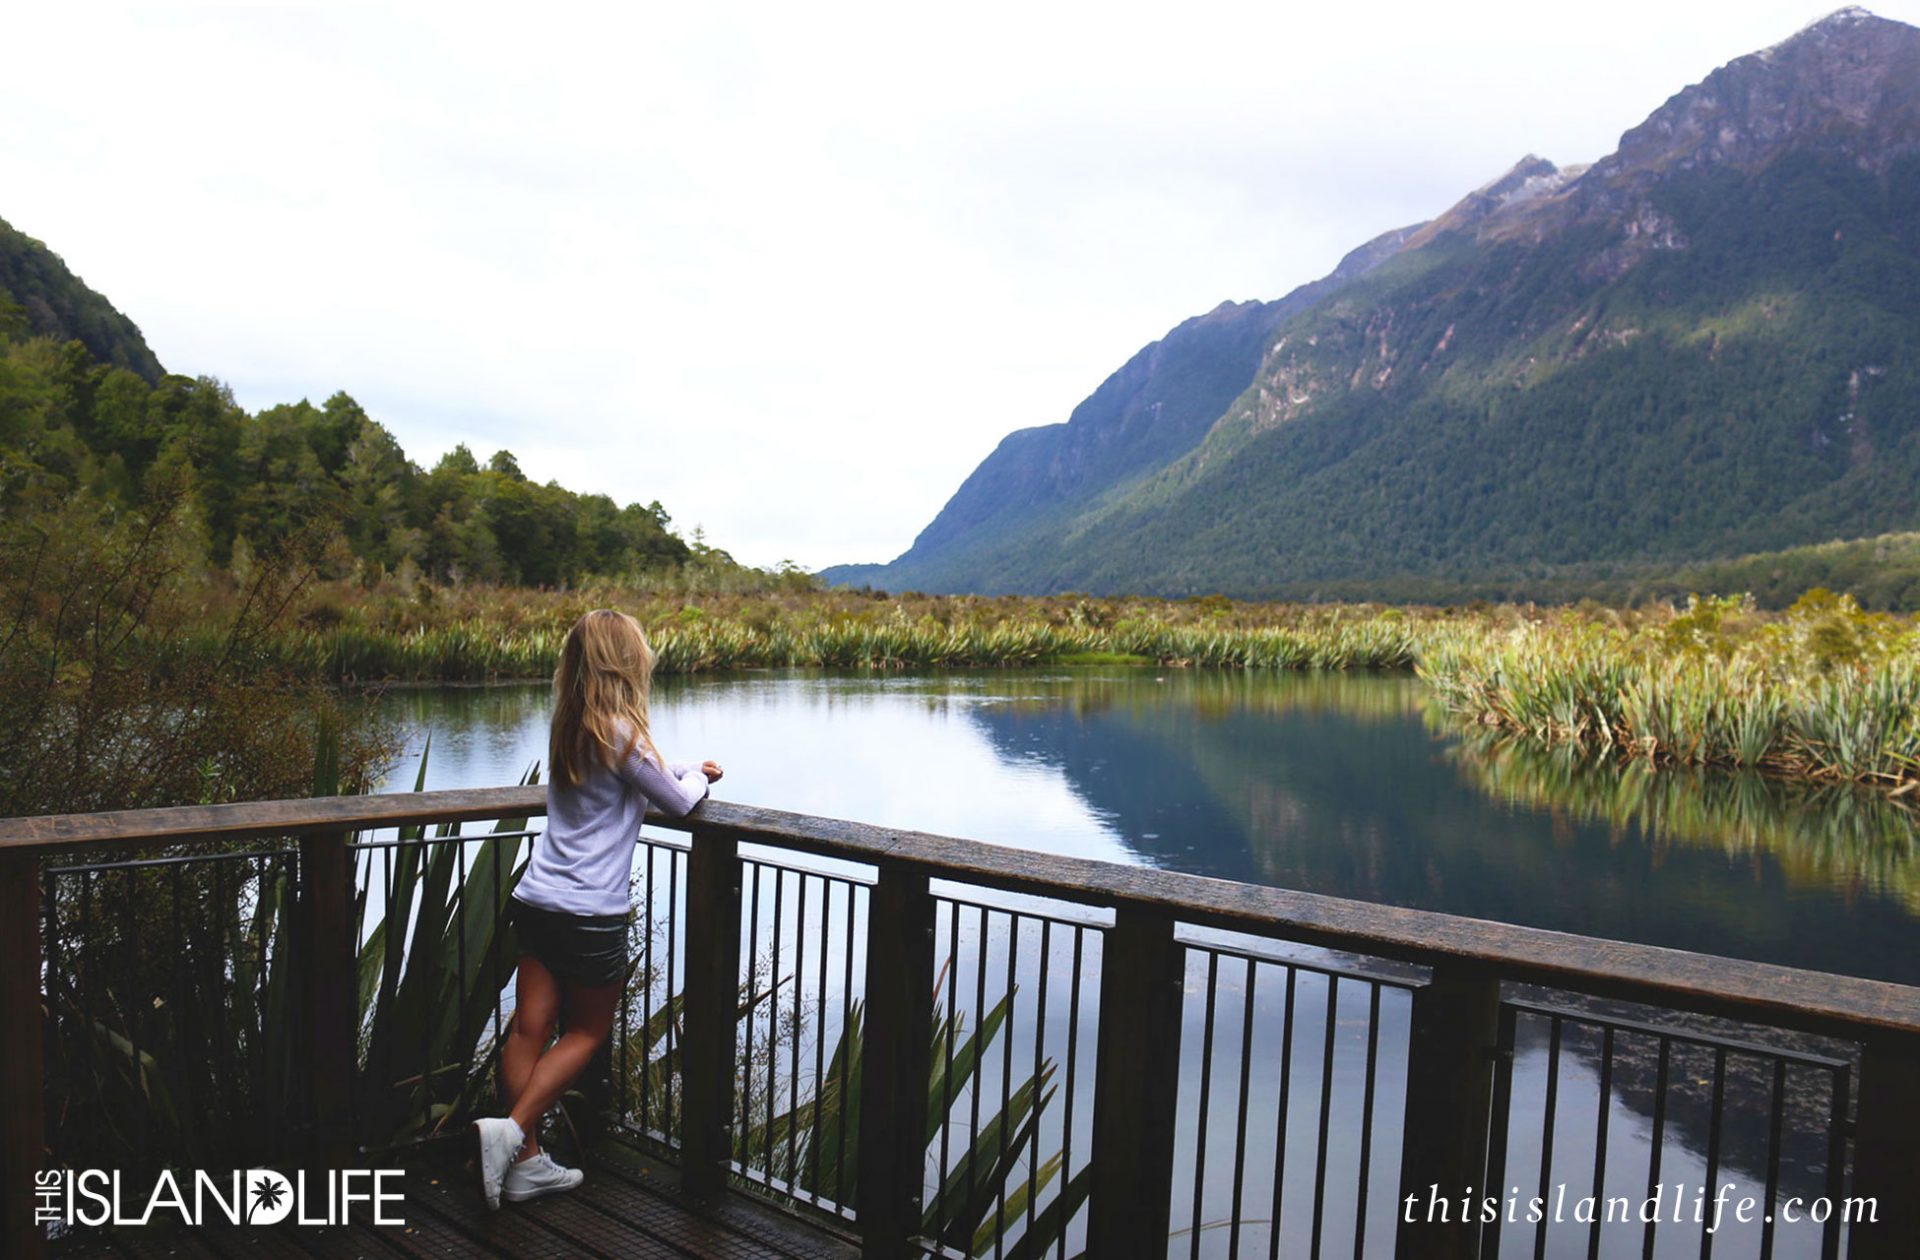 THIS ISLAND LIFE | Milford Sound, New Zealand